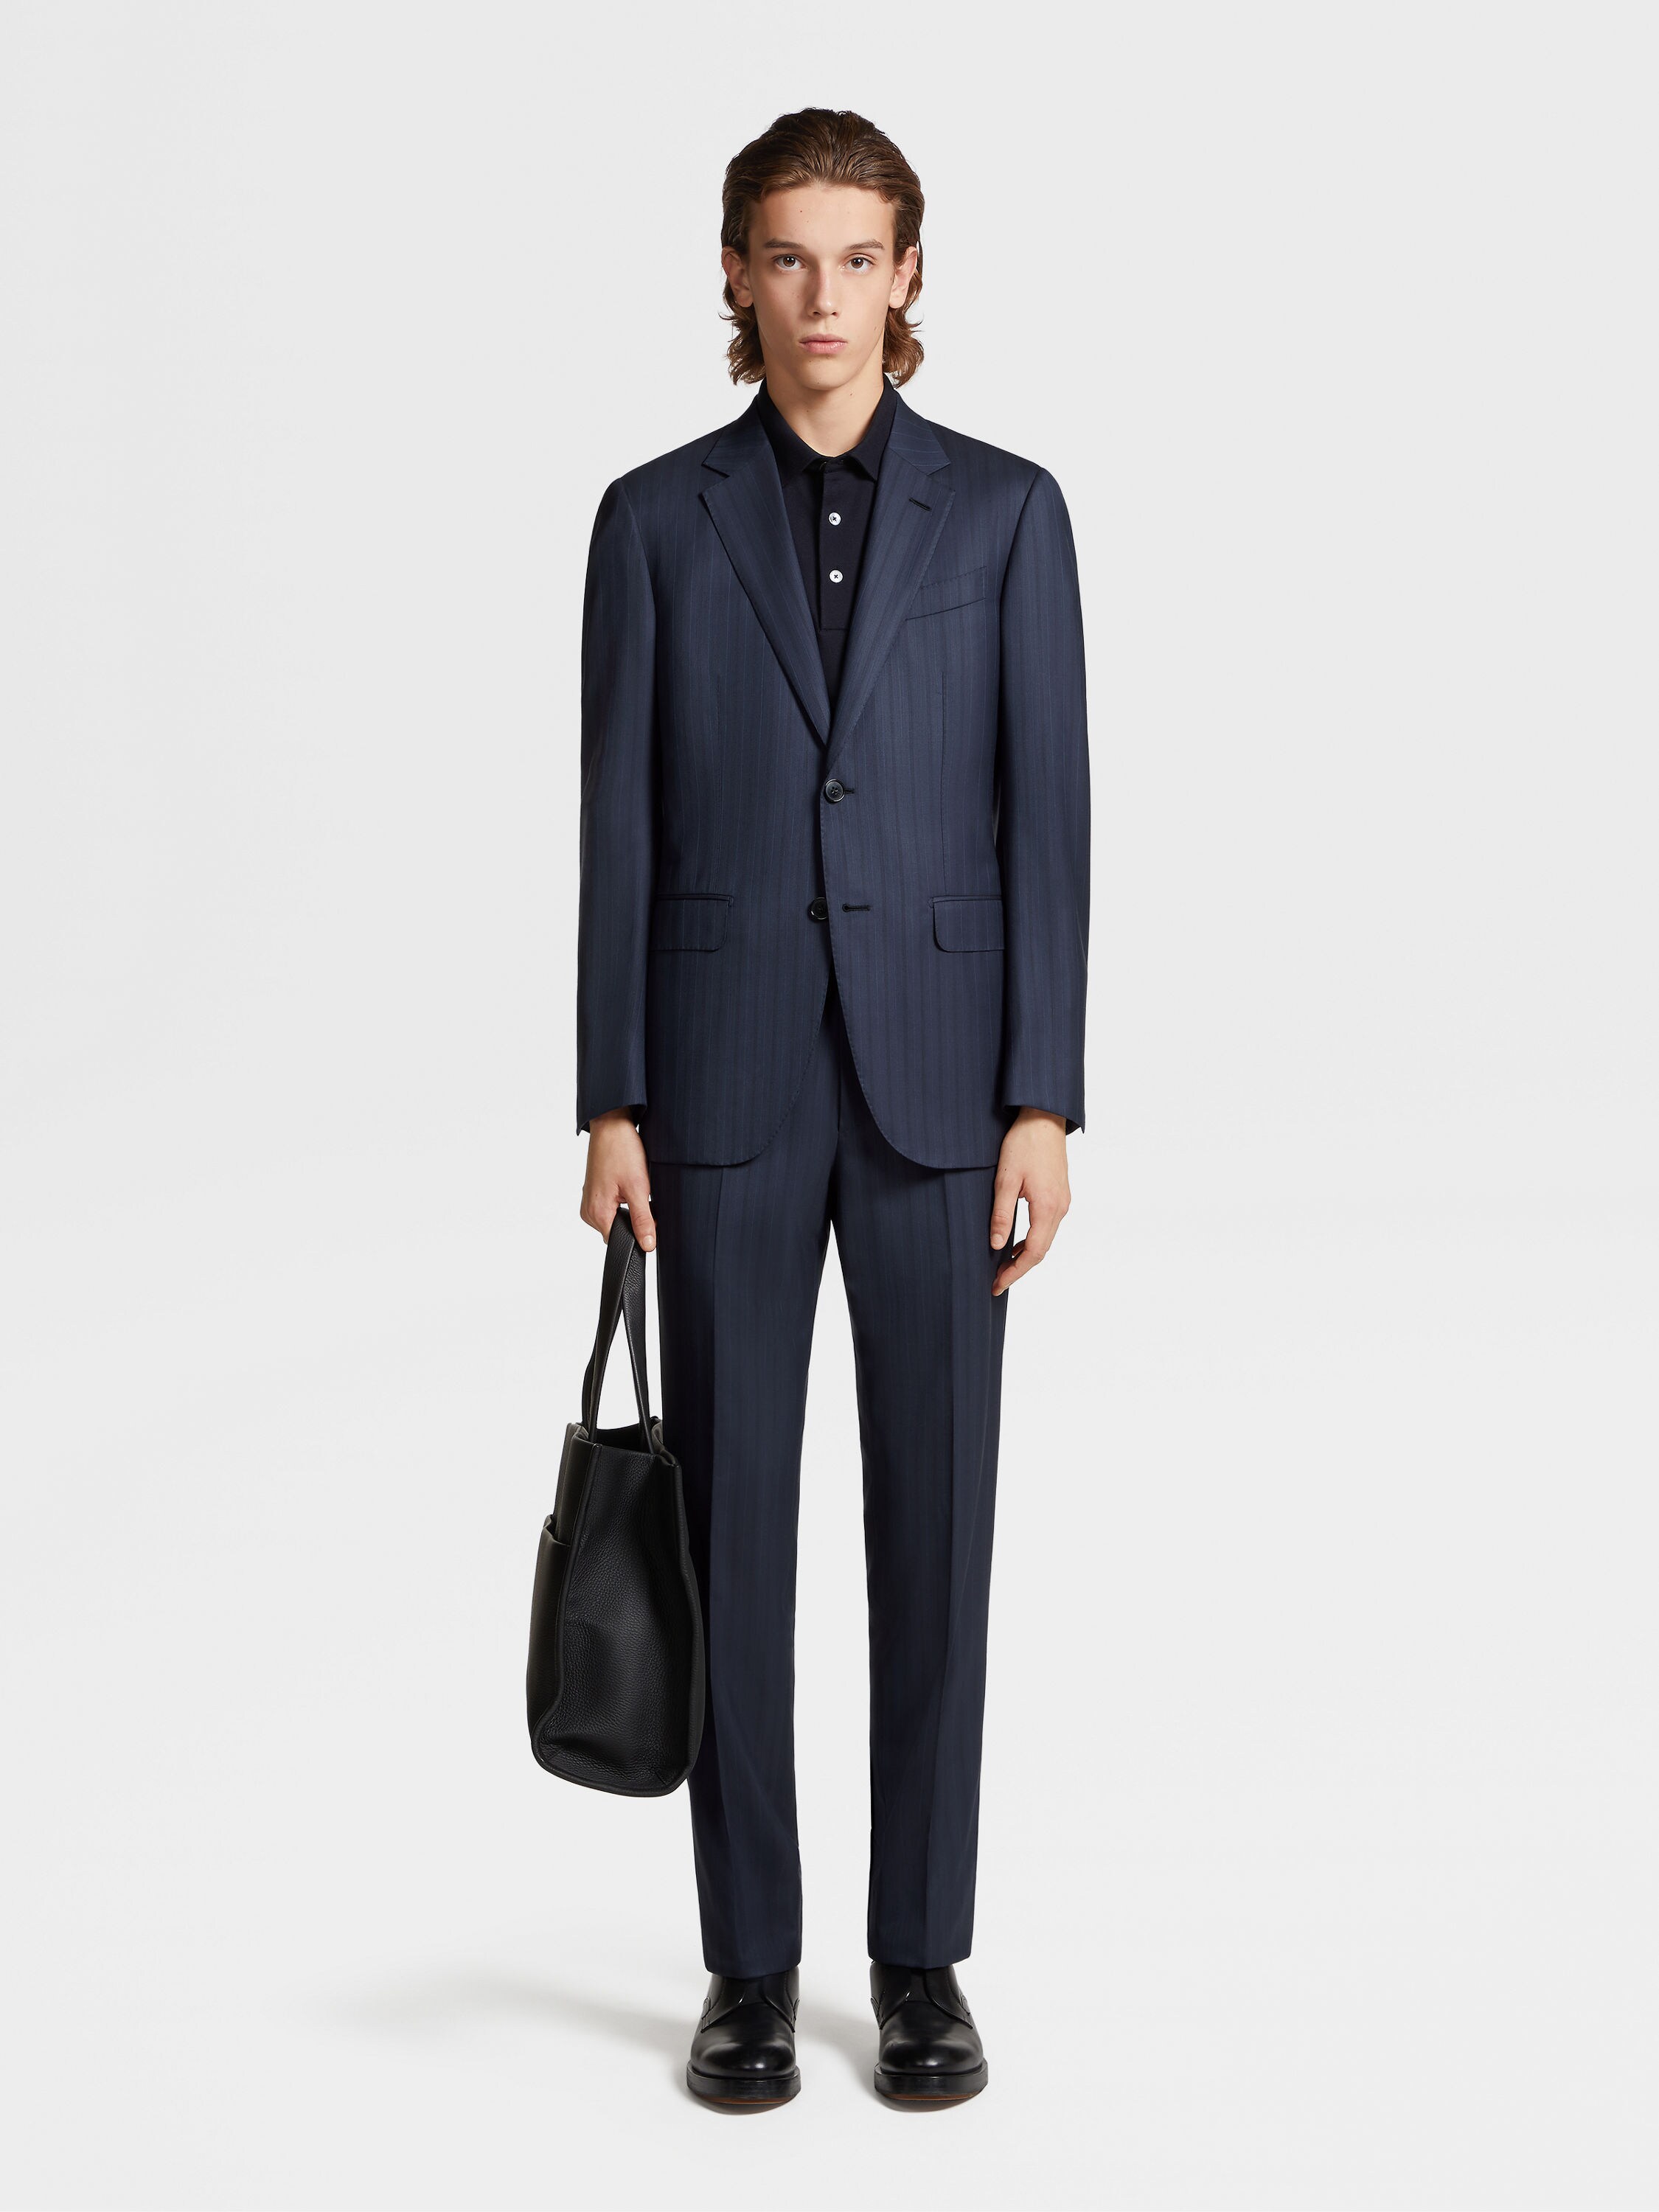 Navy Blue and Black Centoventimila Wool Suit FW23 25594636 | Zegna AU